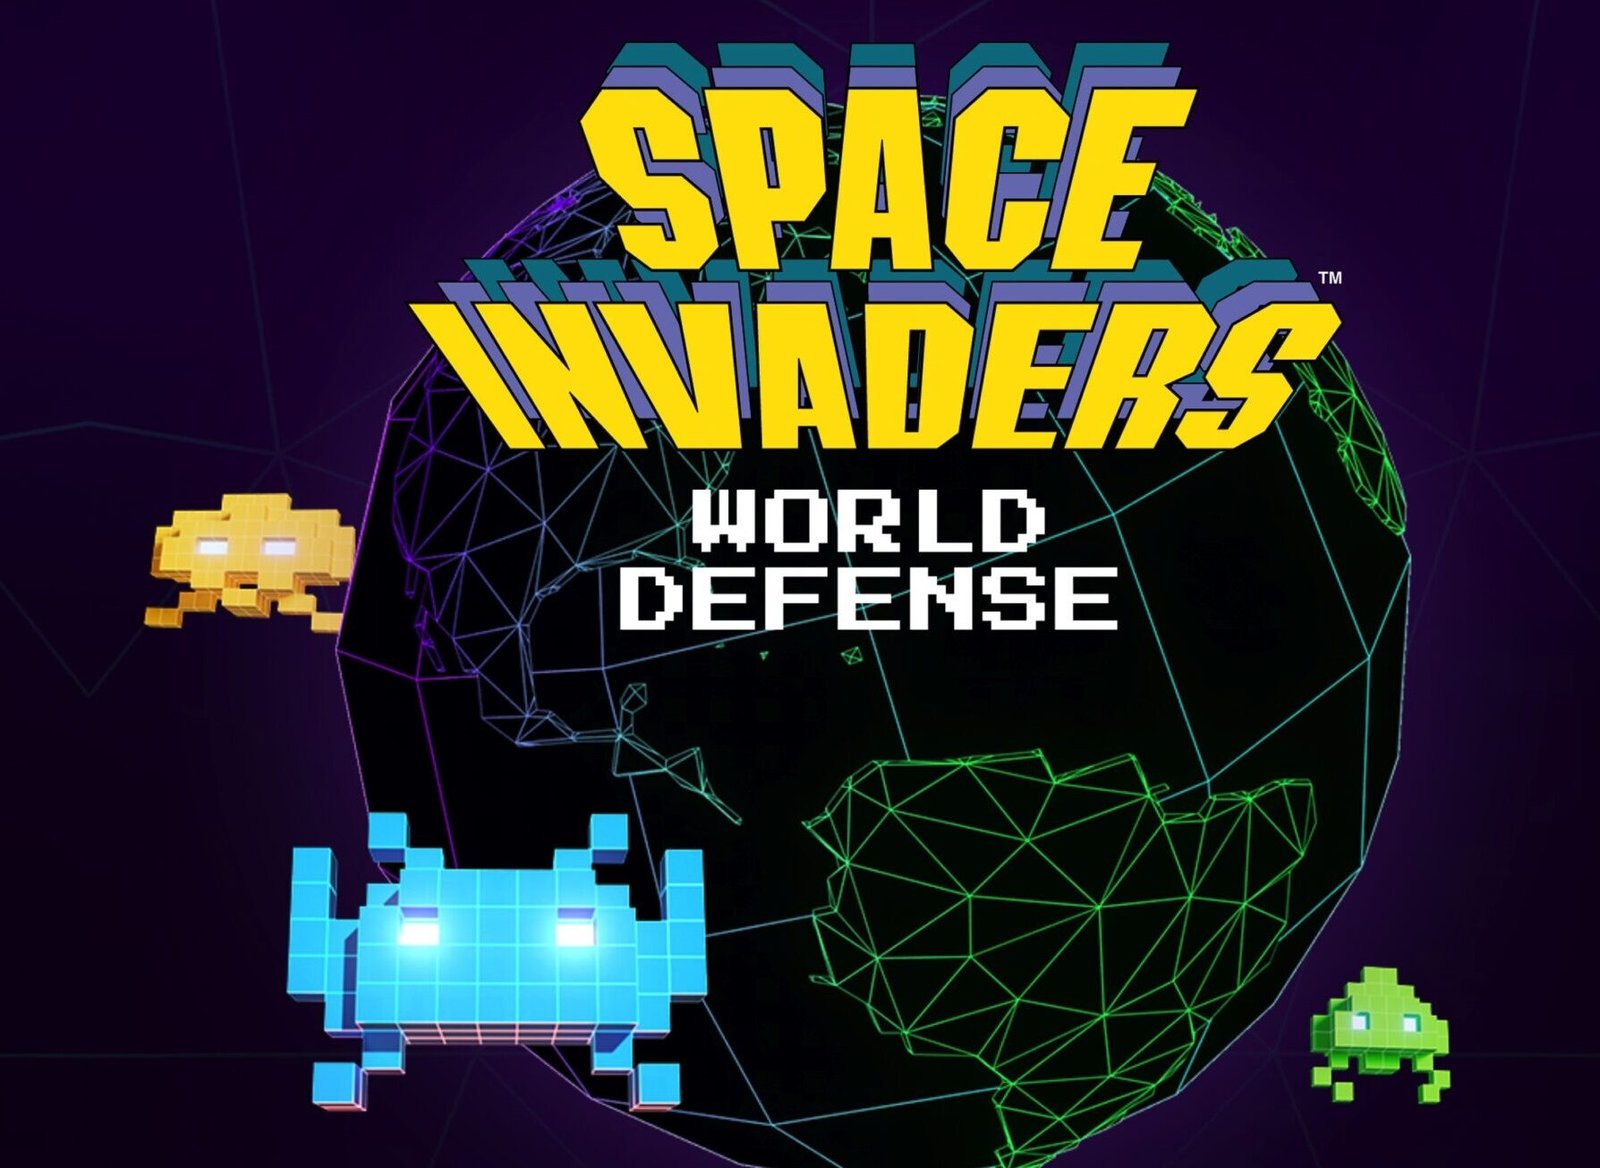 Google with Taito working on AR Space Invaders game